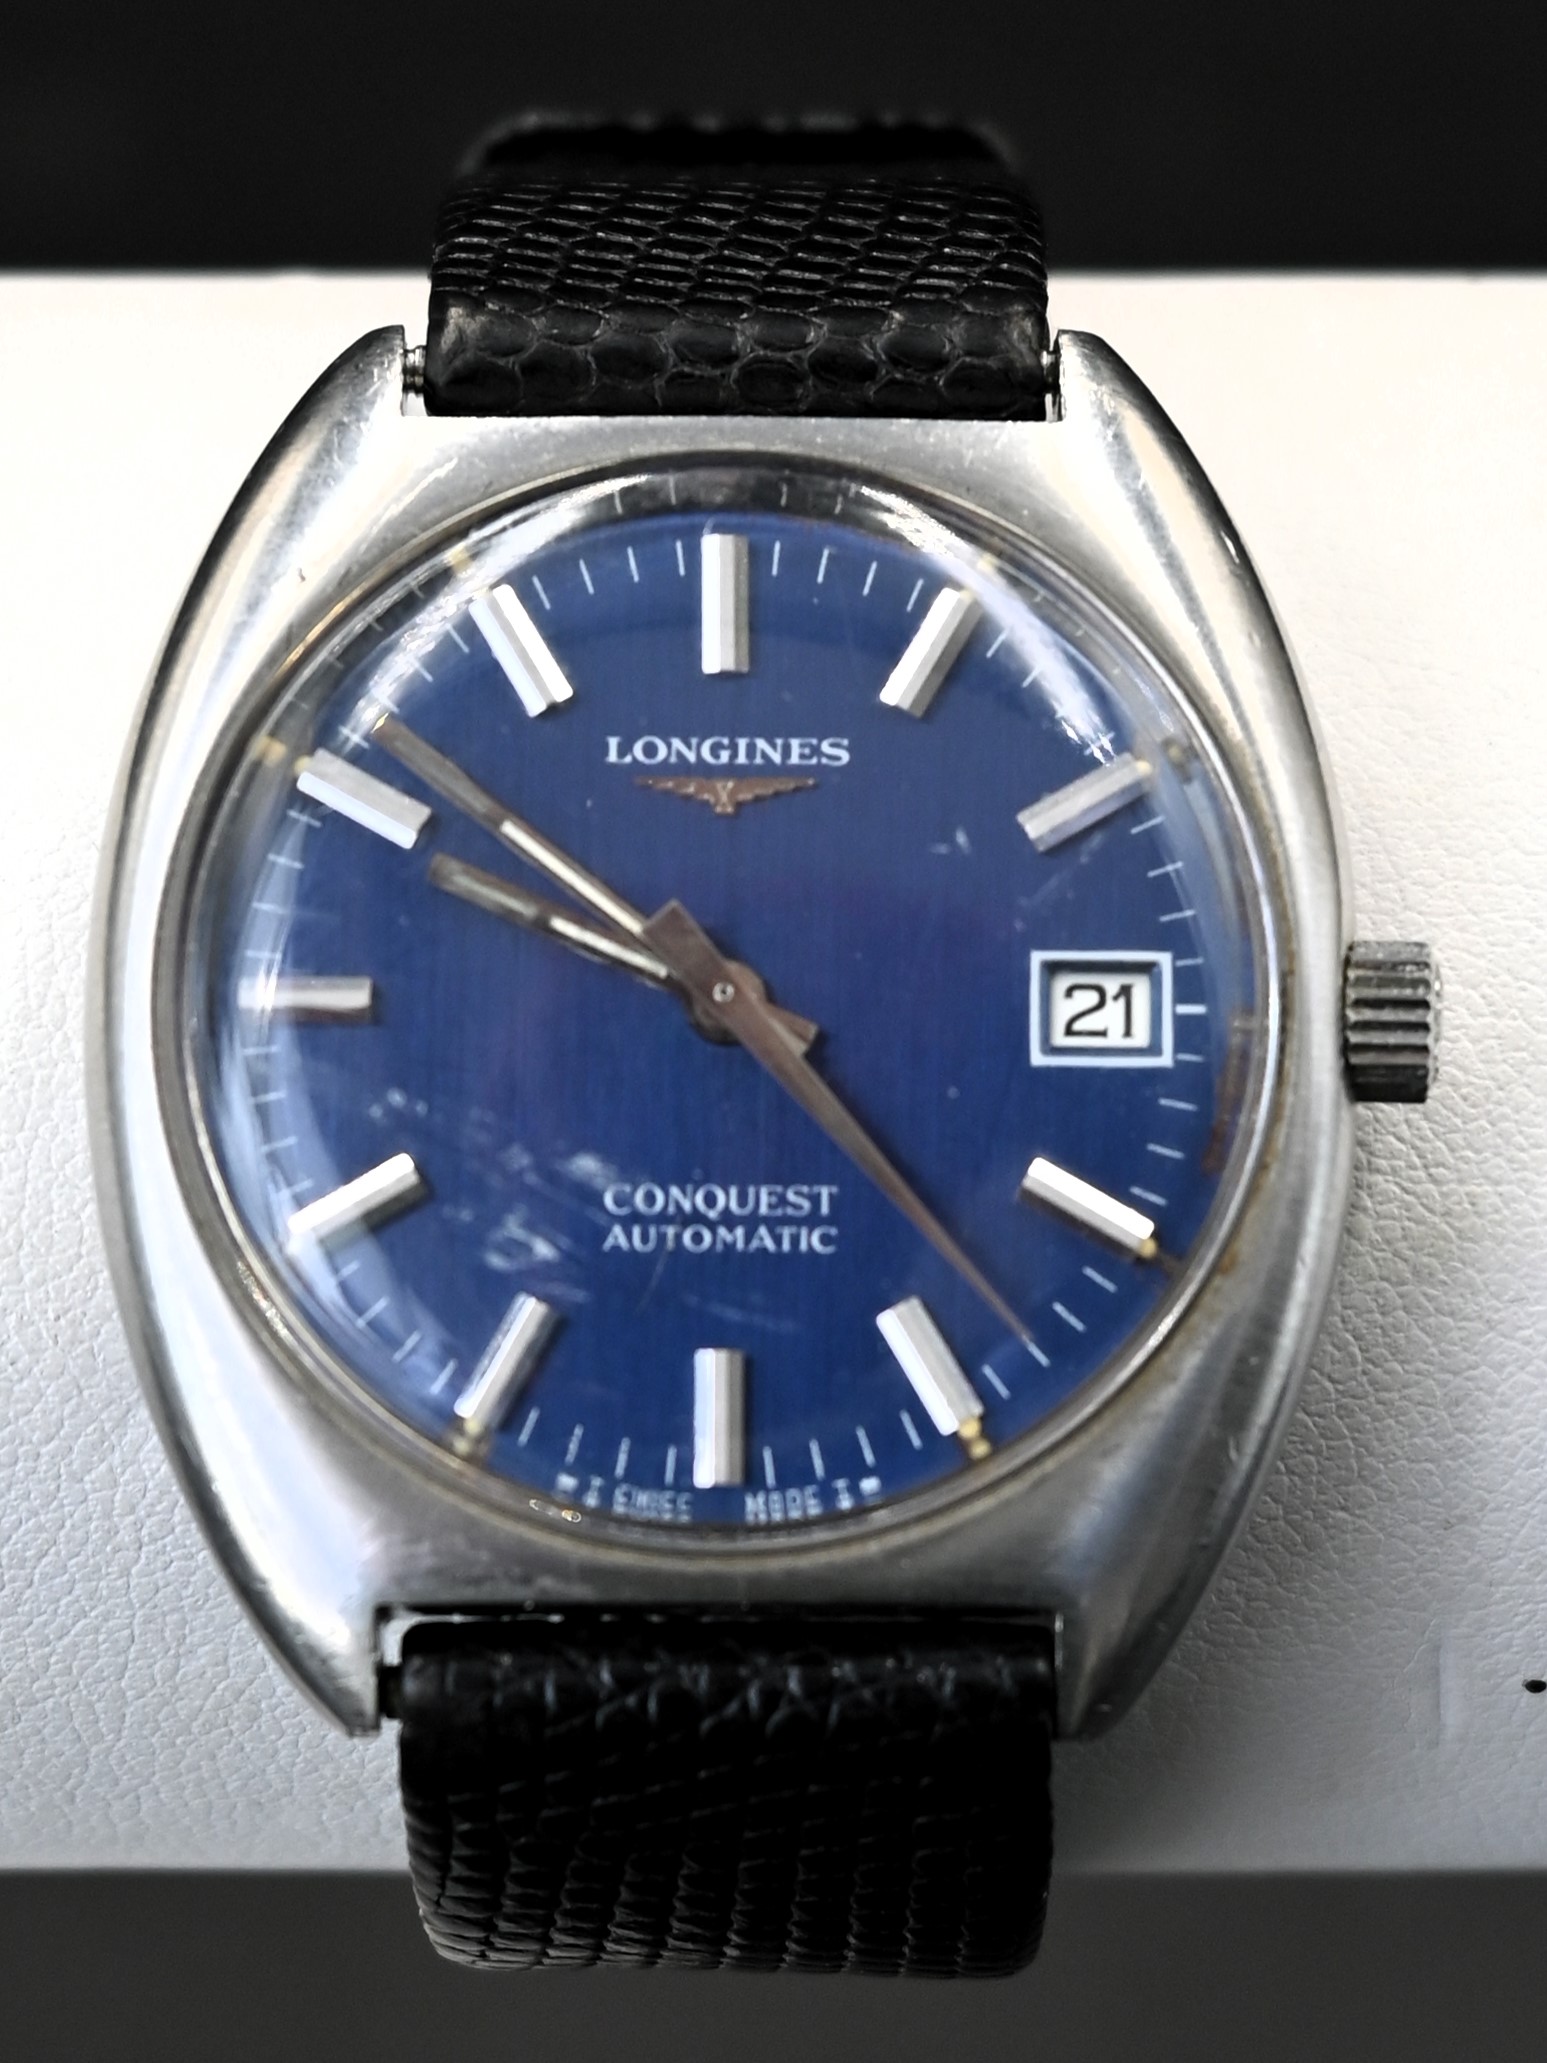 GENTLEMENS 'LONGINES' WRISTWATCH, round blue dial signed 'Longines, Conquest Automatic', baton - Image 2 of 2